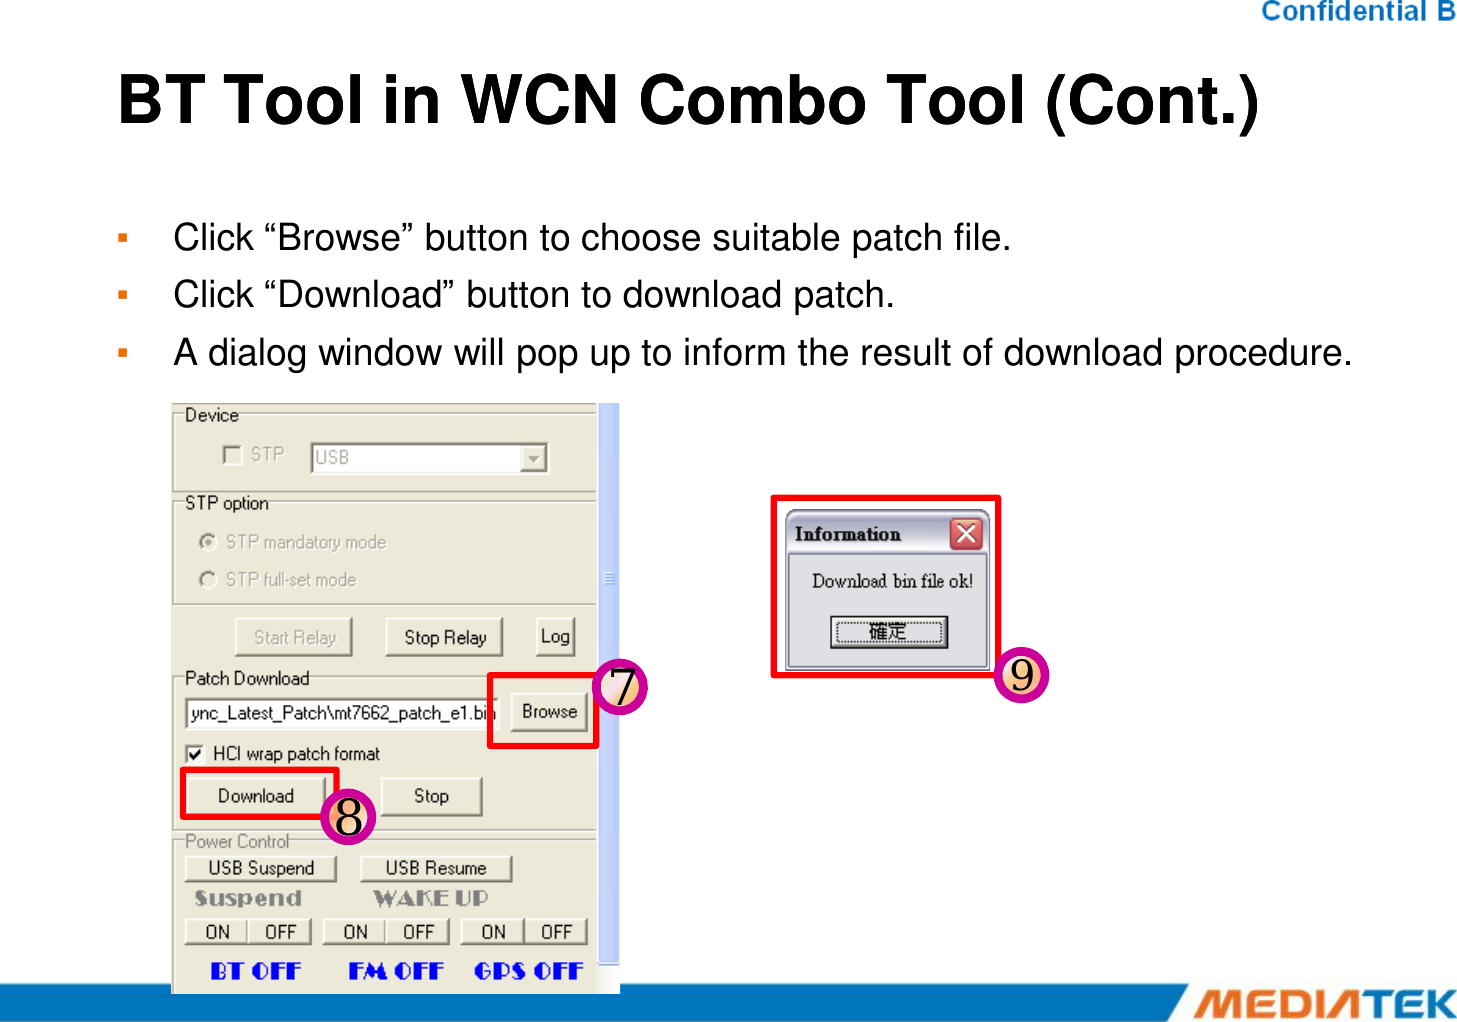 BT Tool in WCN Combo Tool (Cont.)BT Tool in WCN Combo Tool (Cont.)▪Click “Browse” button to choose suitable patch file.▪Click “Download” button to download patch.▪A dialog window will pop up to inform the result of download procedure.789